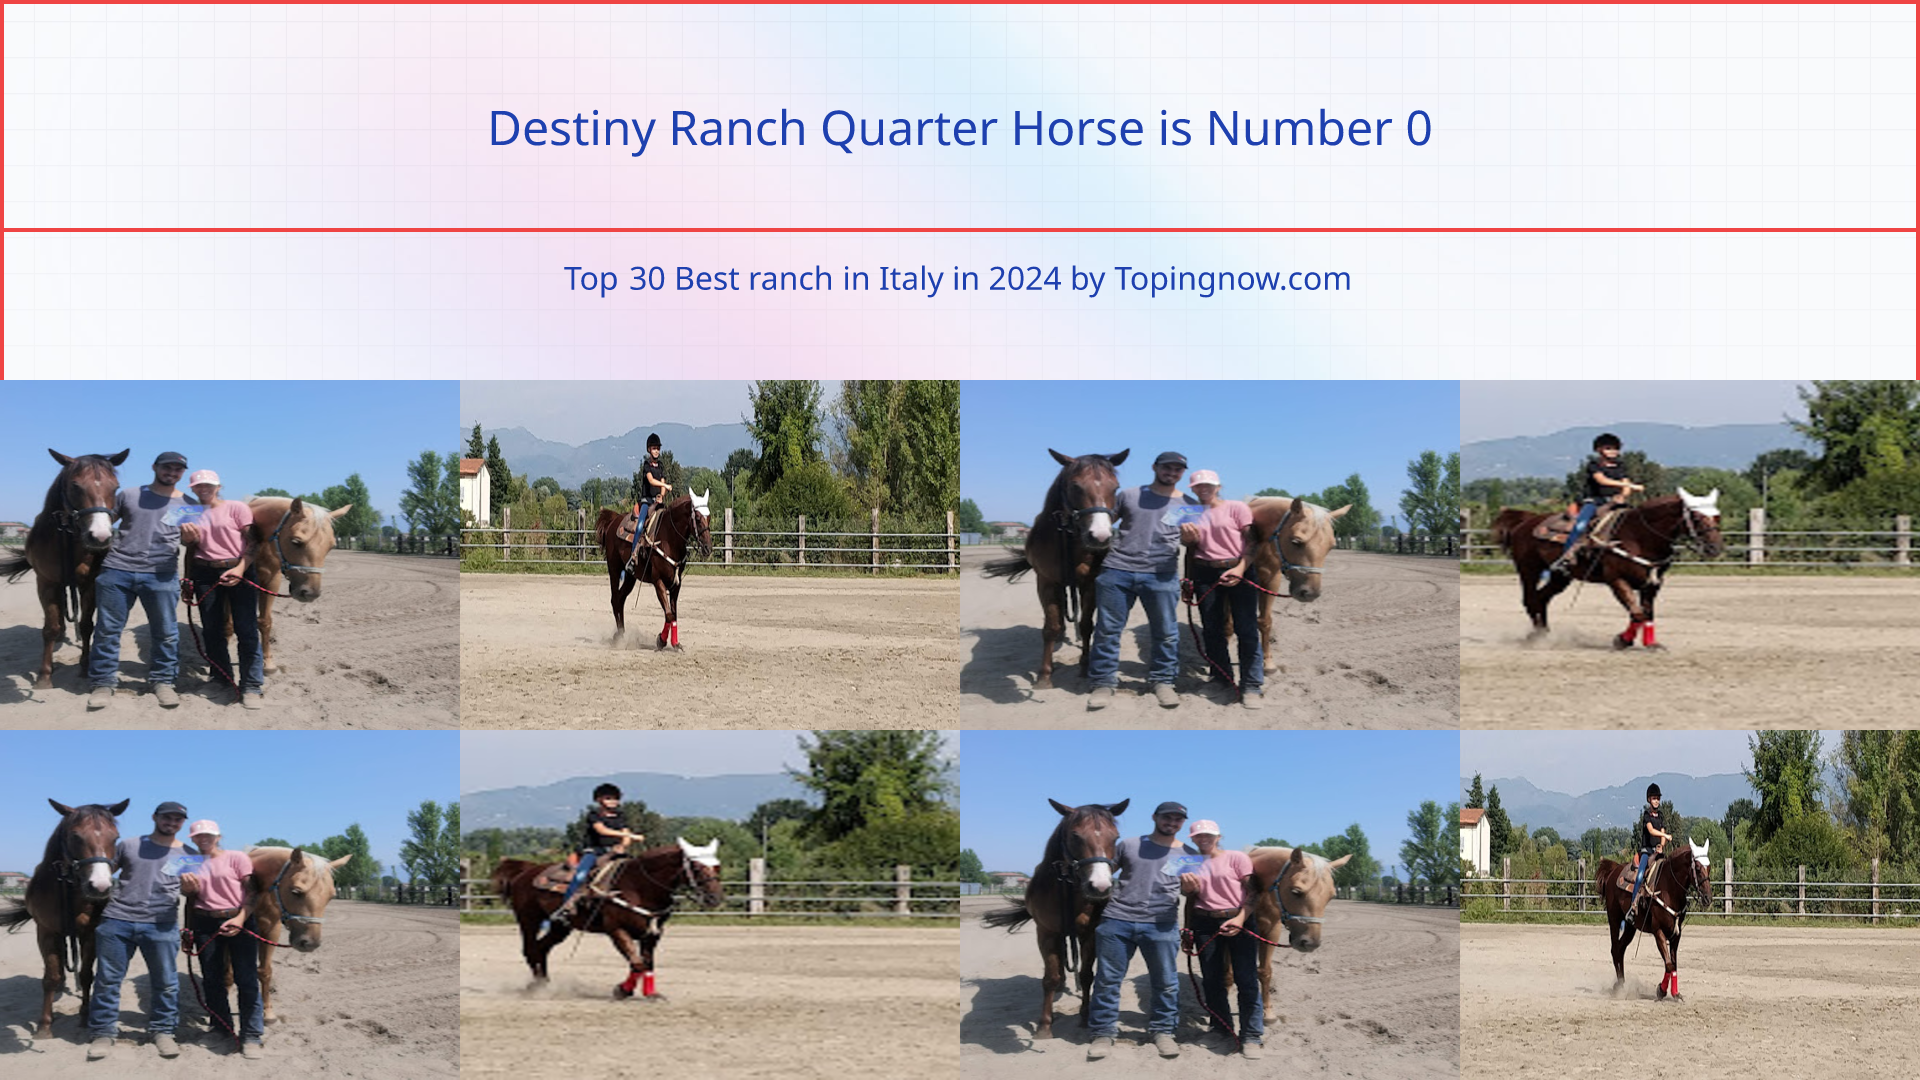 Destiny Ranch Quarter Horse: Top 30 Best ranch in Italy in 2024